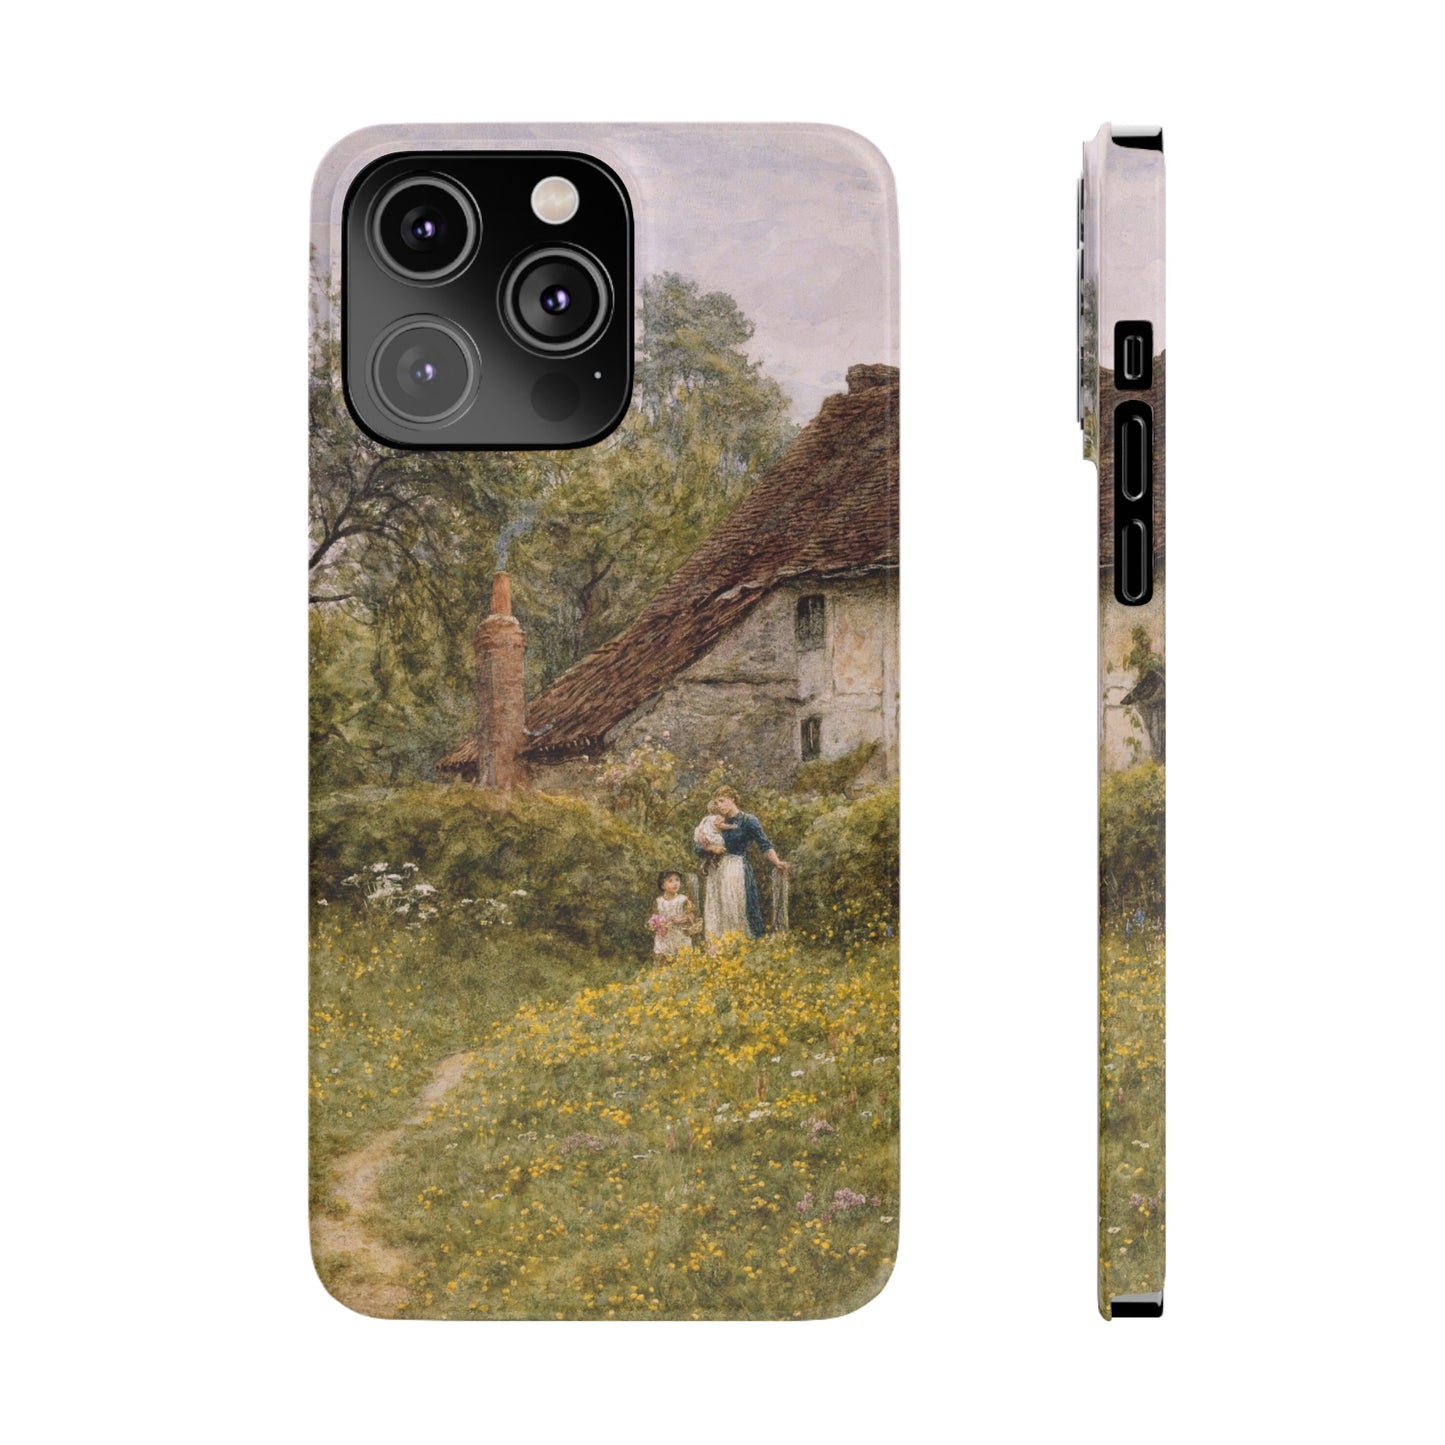 Walk with me - Iphone Case